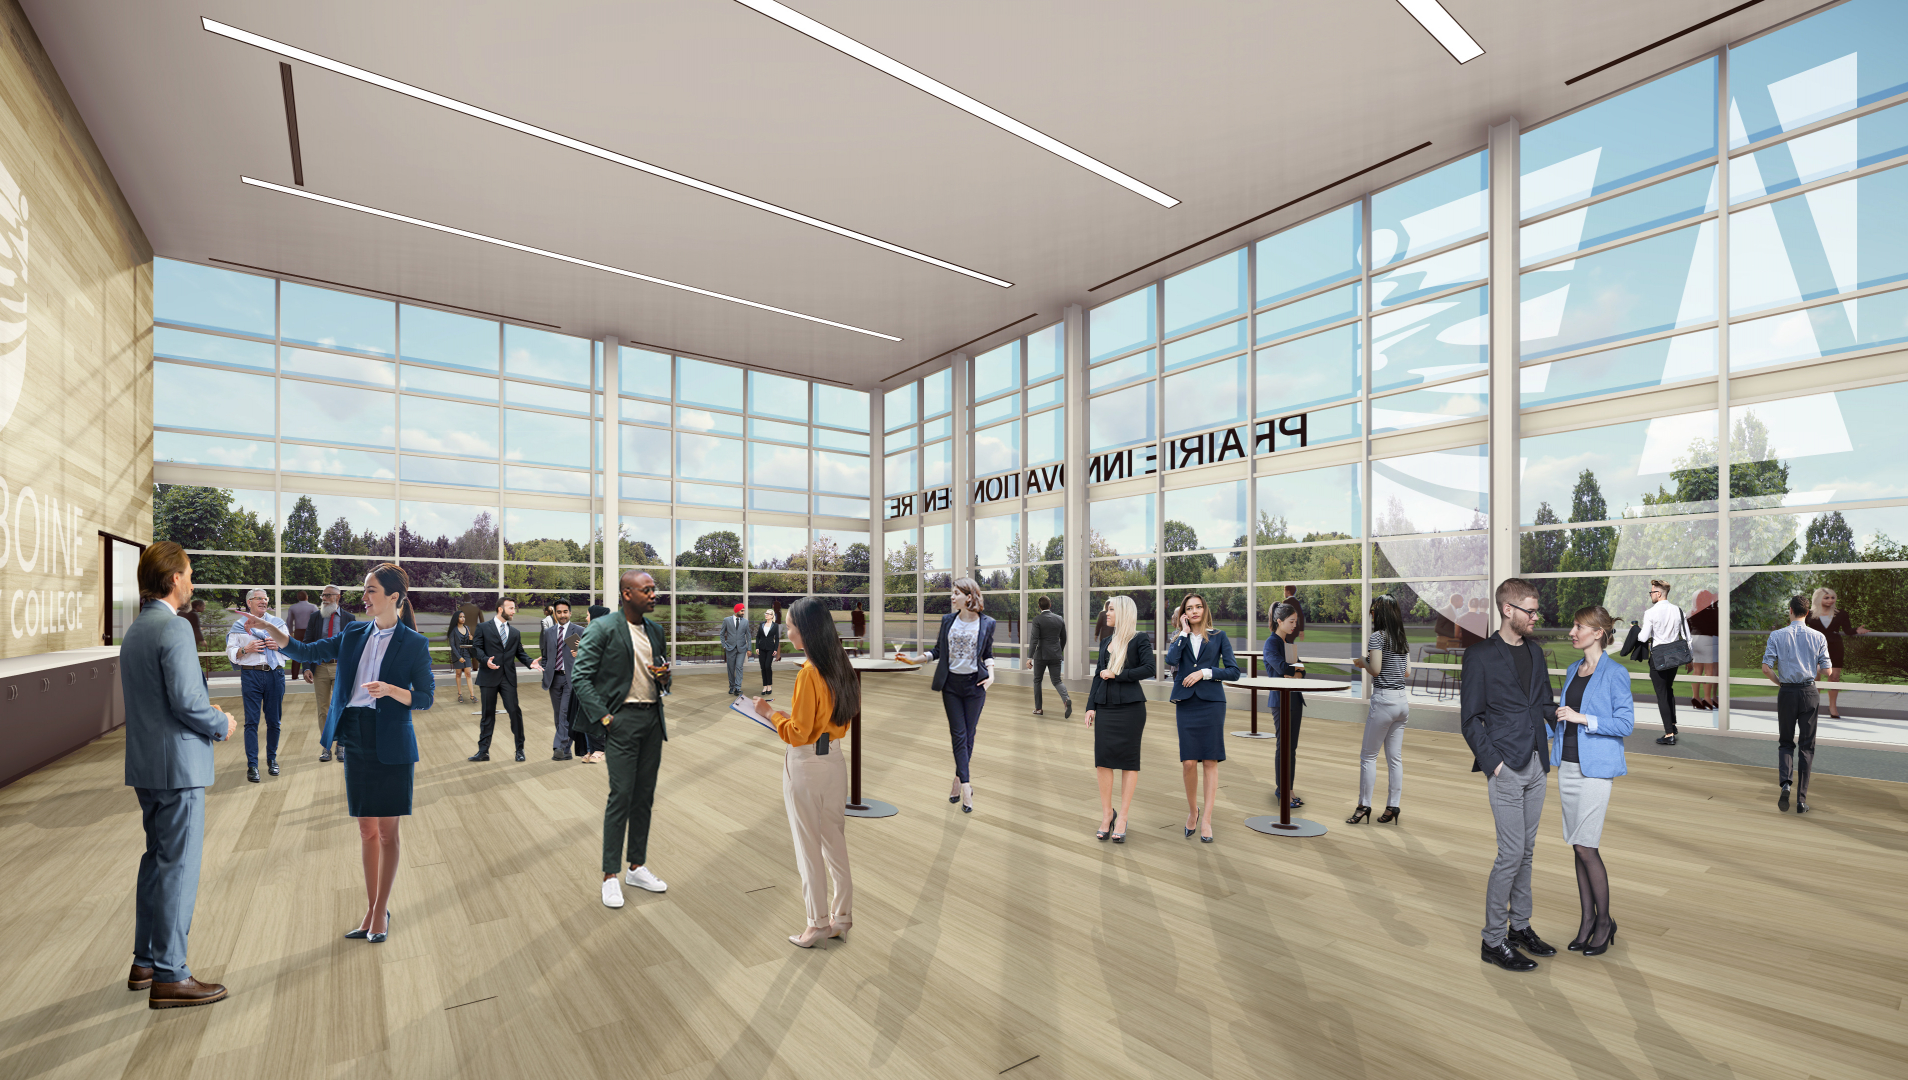 A rendering of the inside of the future Prairie Innovation Centre shows more than a dozen people spread out through a room in what appears to be a reception-style networking event.